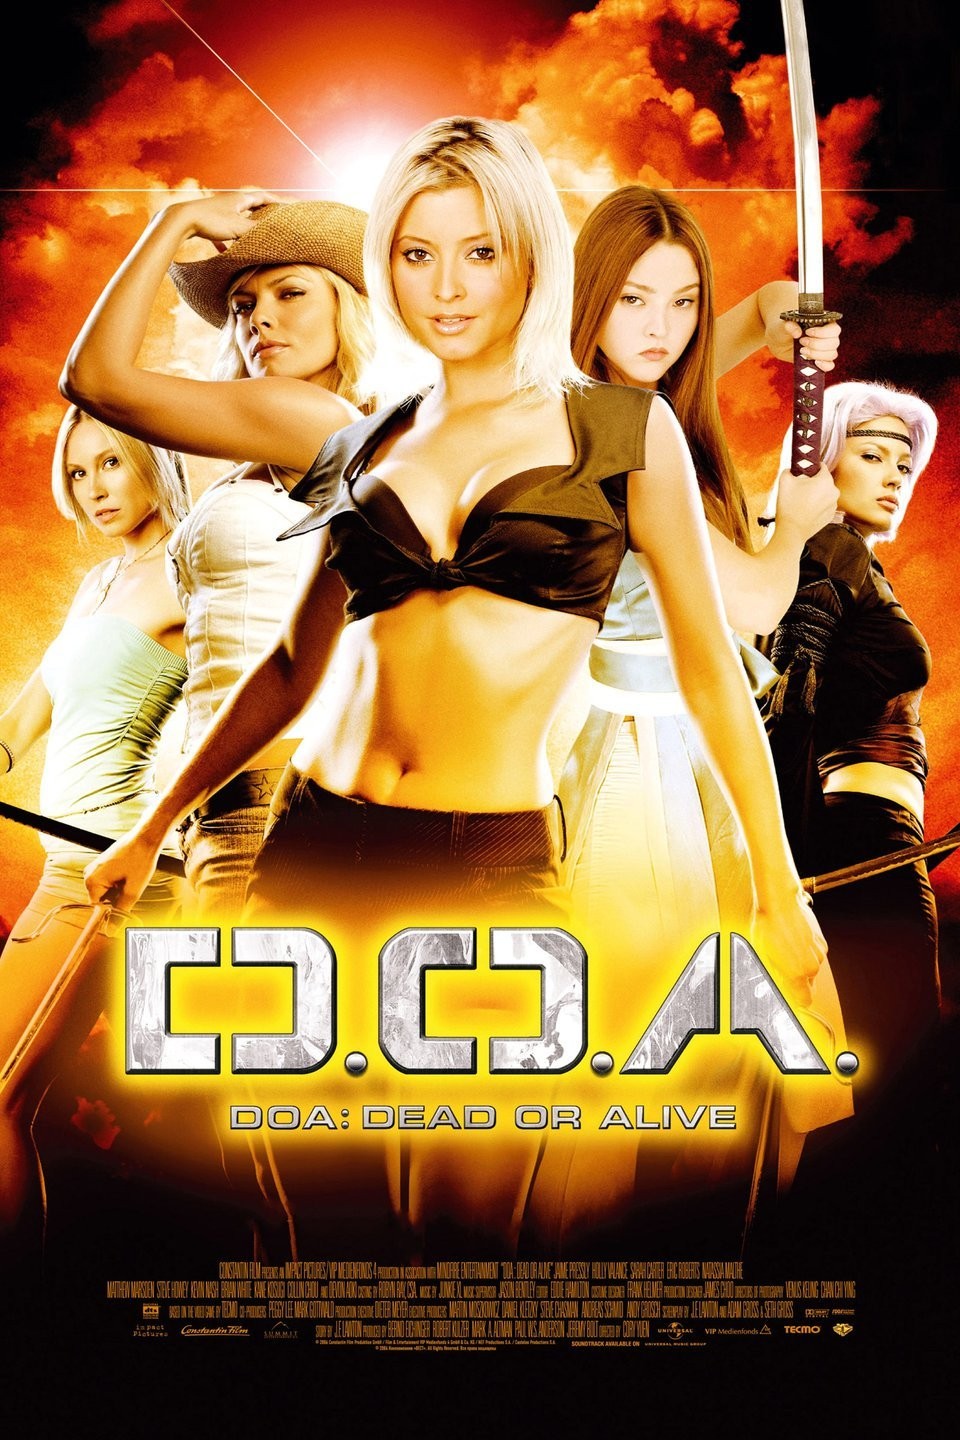 coins sial recommends watch doa free online pic